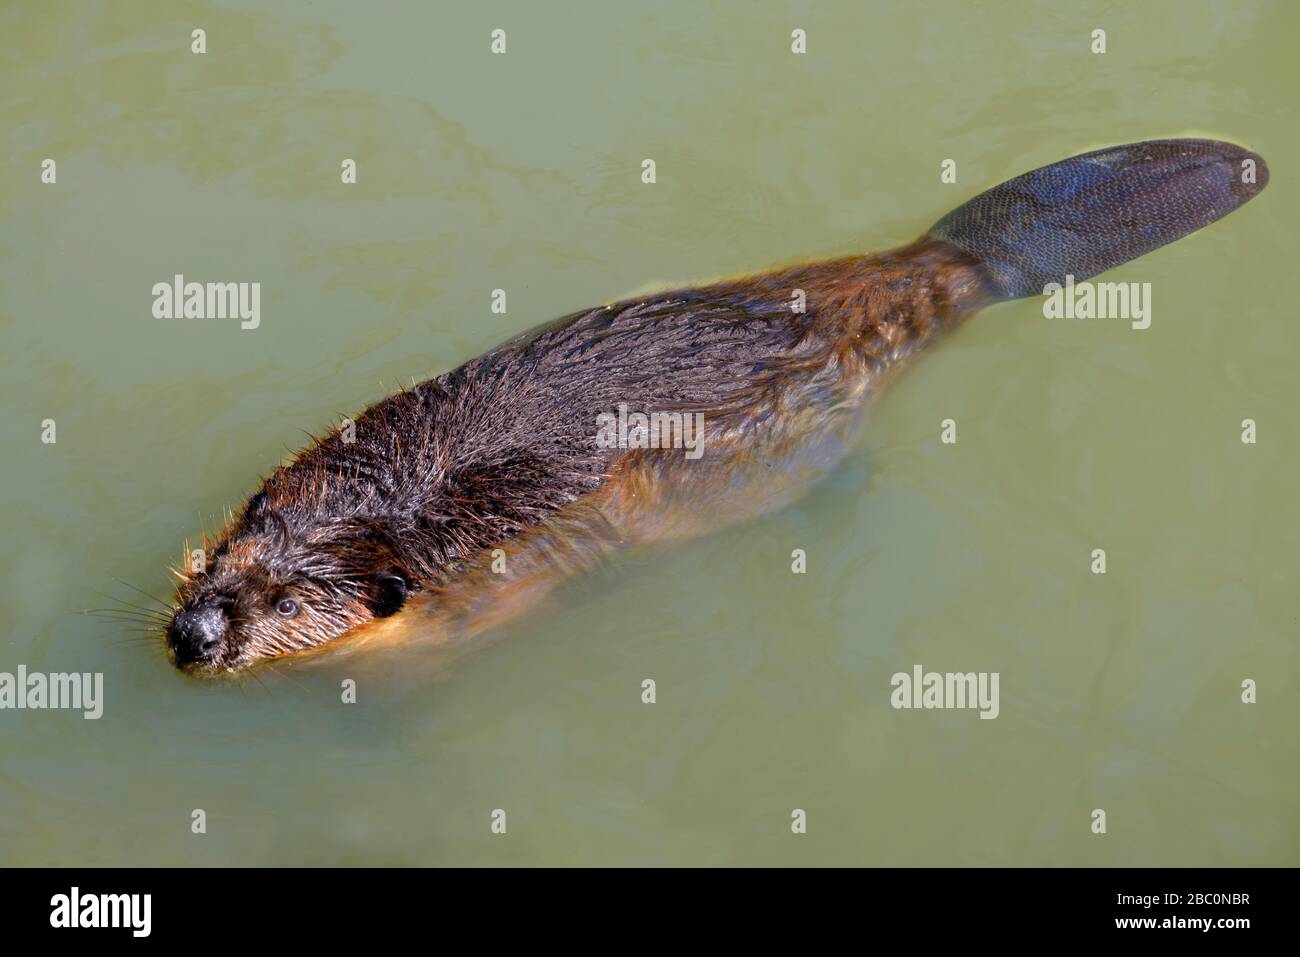 North American Beaver (Castor canadensis) swimming on the surface of the water with its flat tail clearly visible Stock Photo